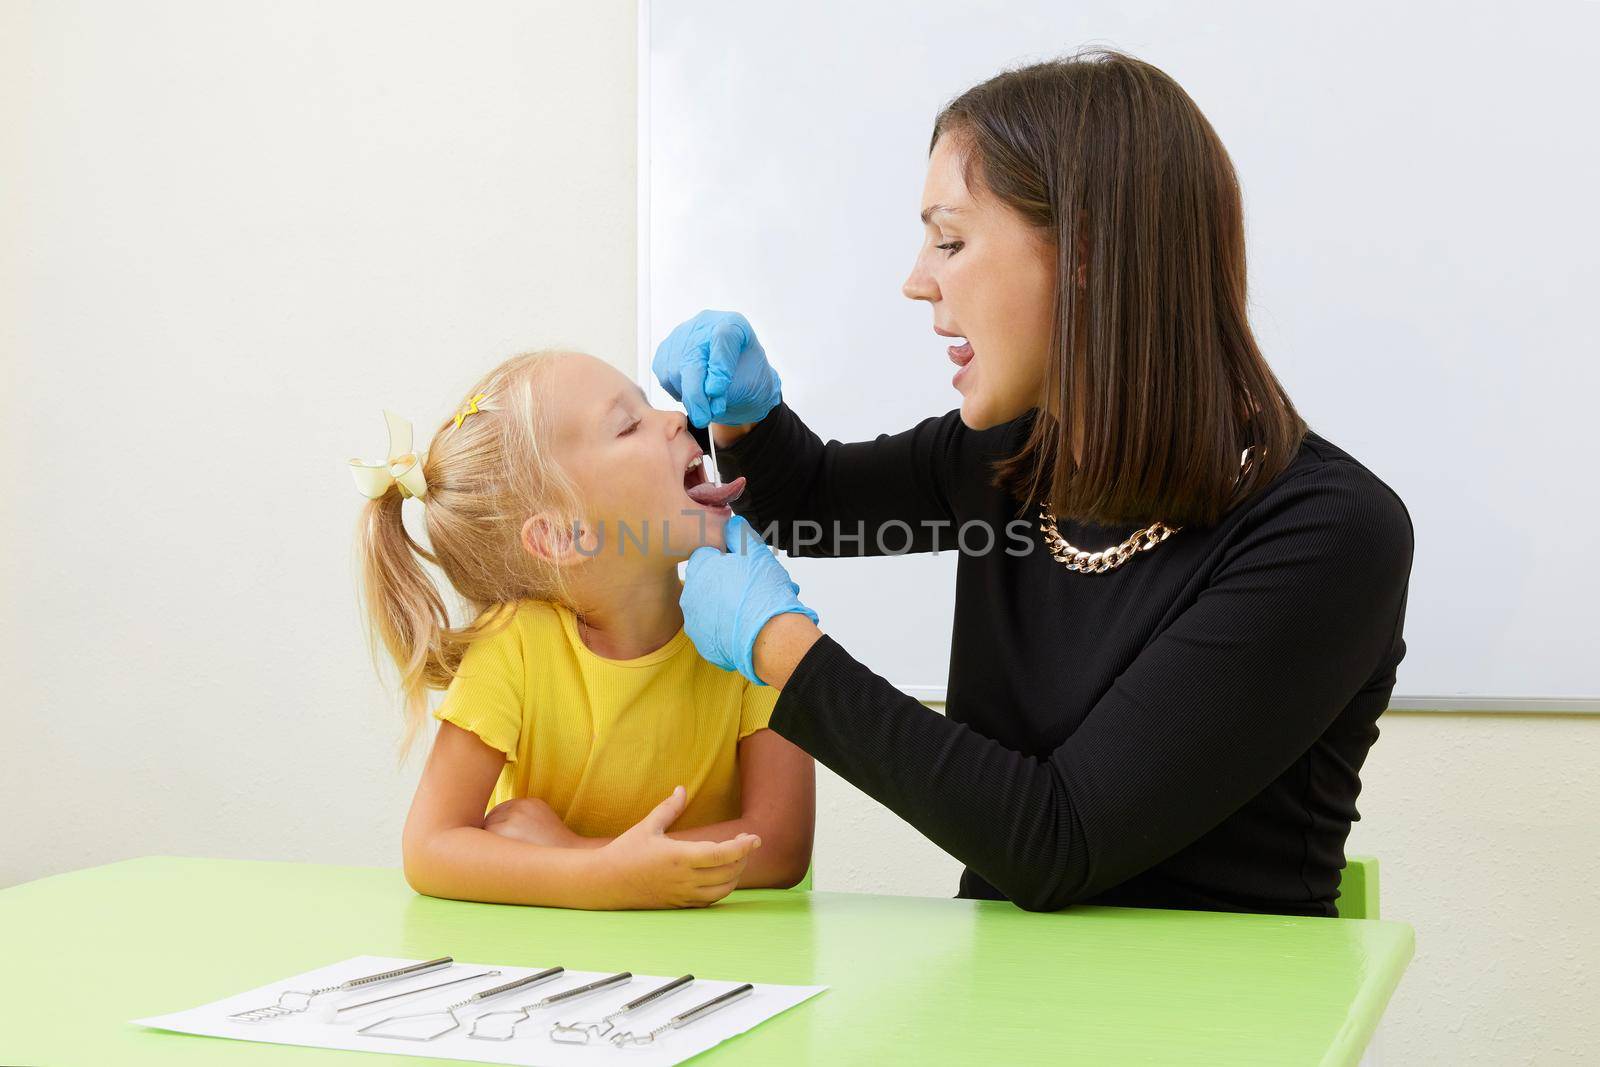 Speech therapist working with little girl in office training pronunciation by Mariakray